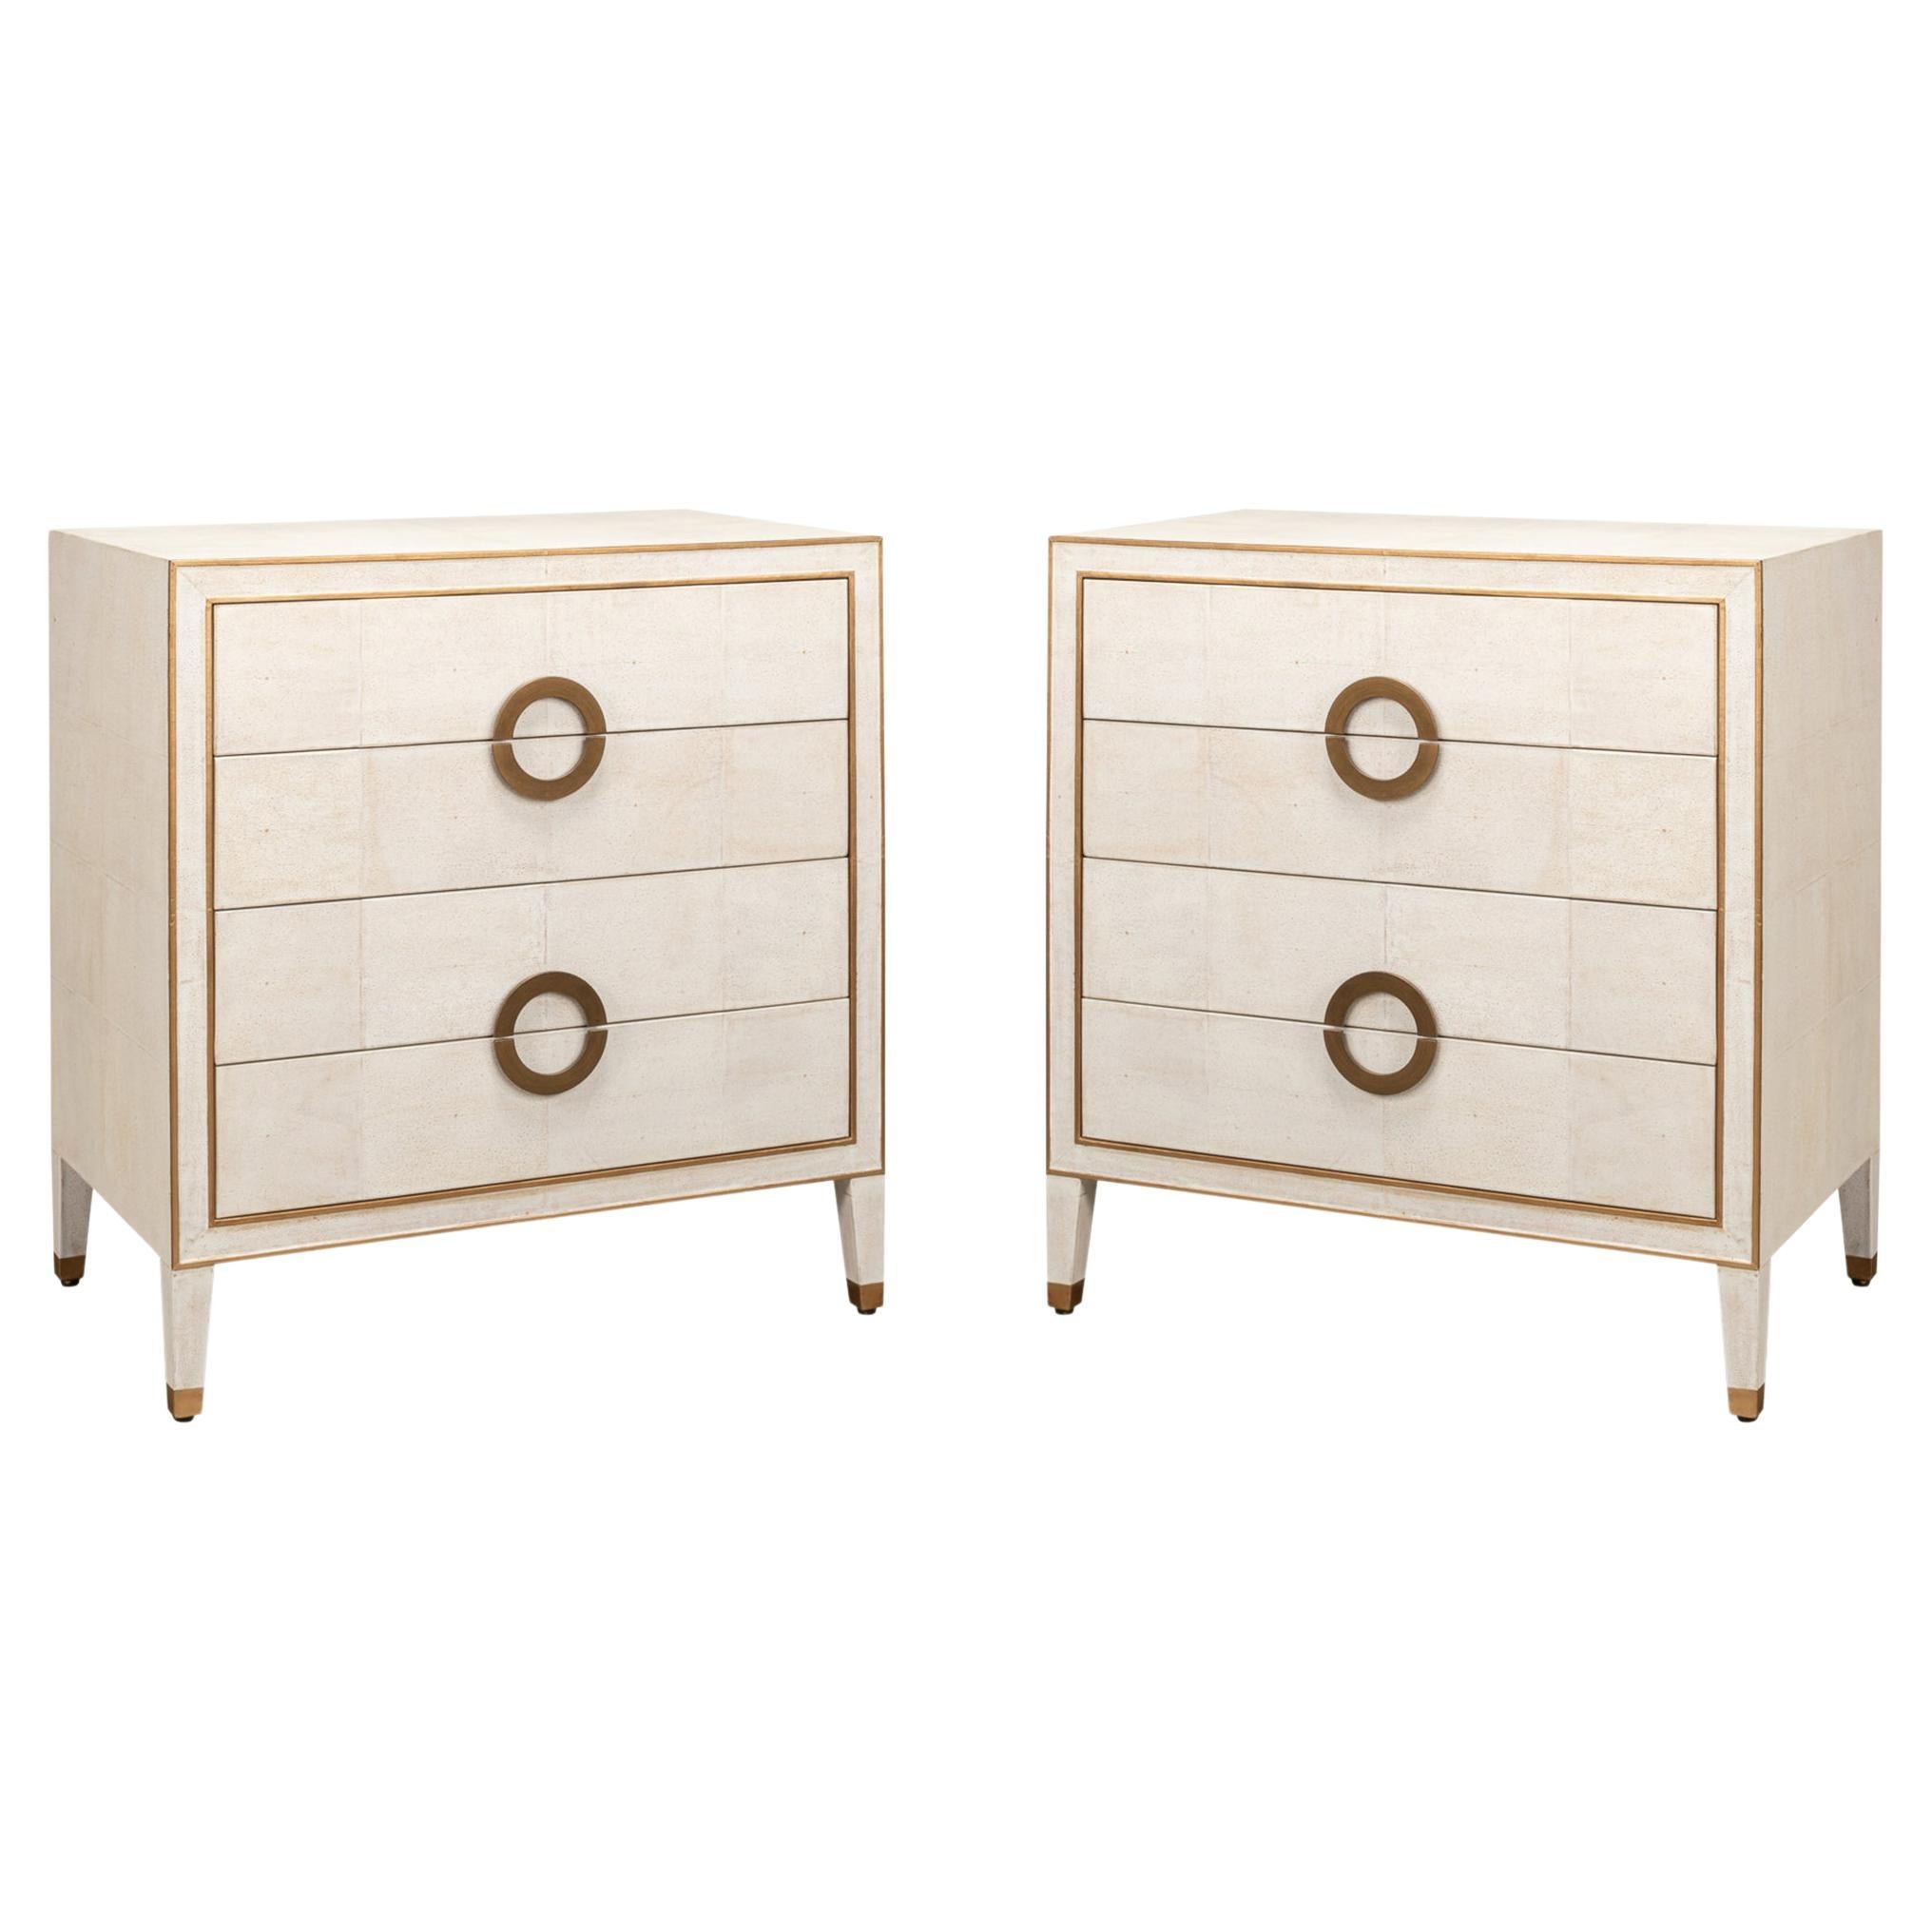 Pair of Art Deco Style Shagreen Chests of Drawers, Ivory